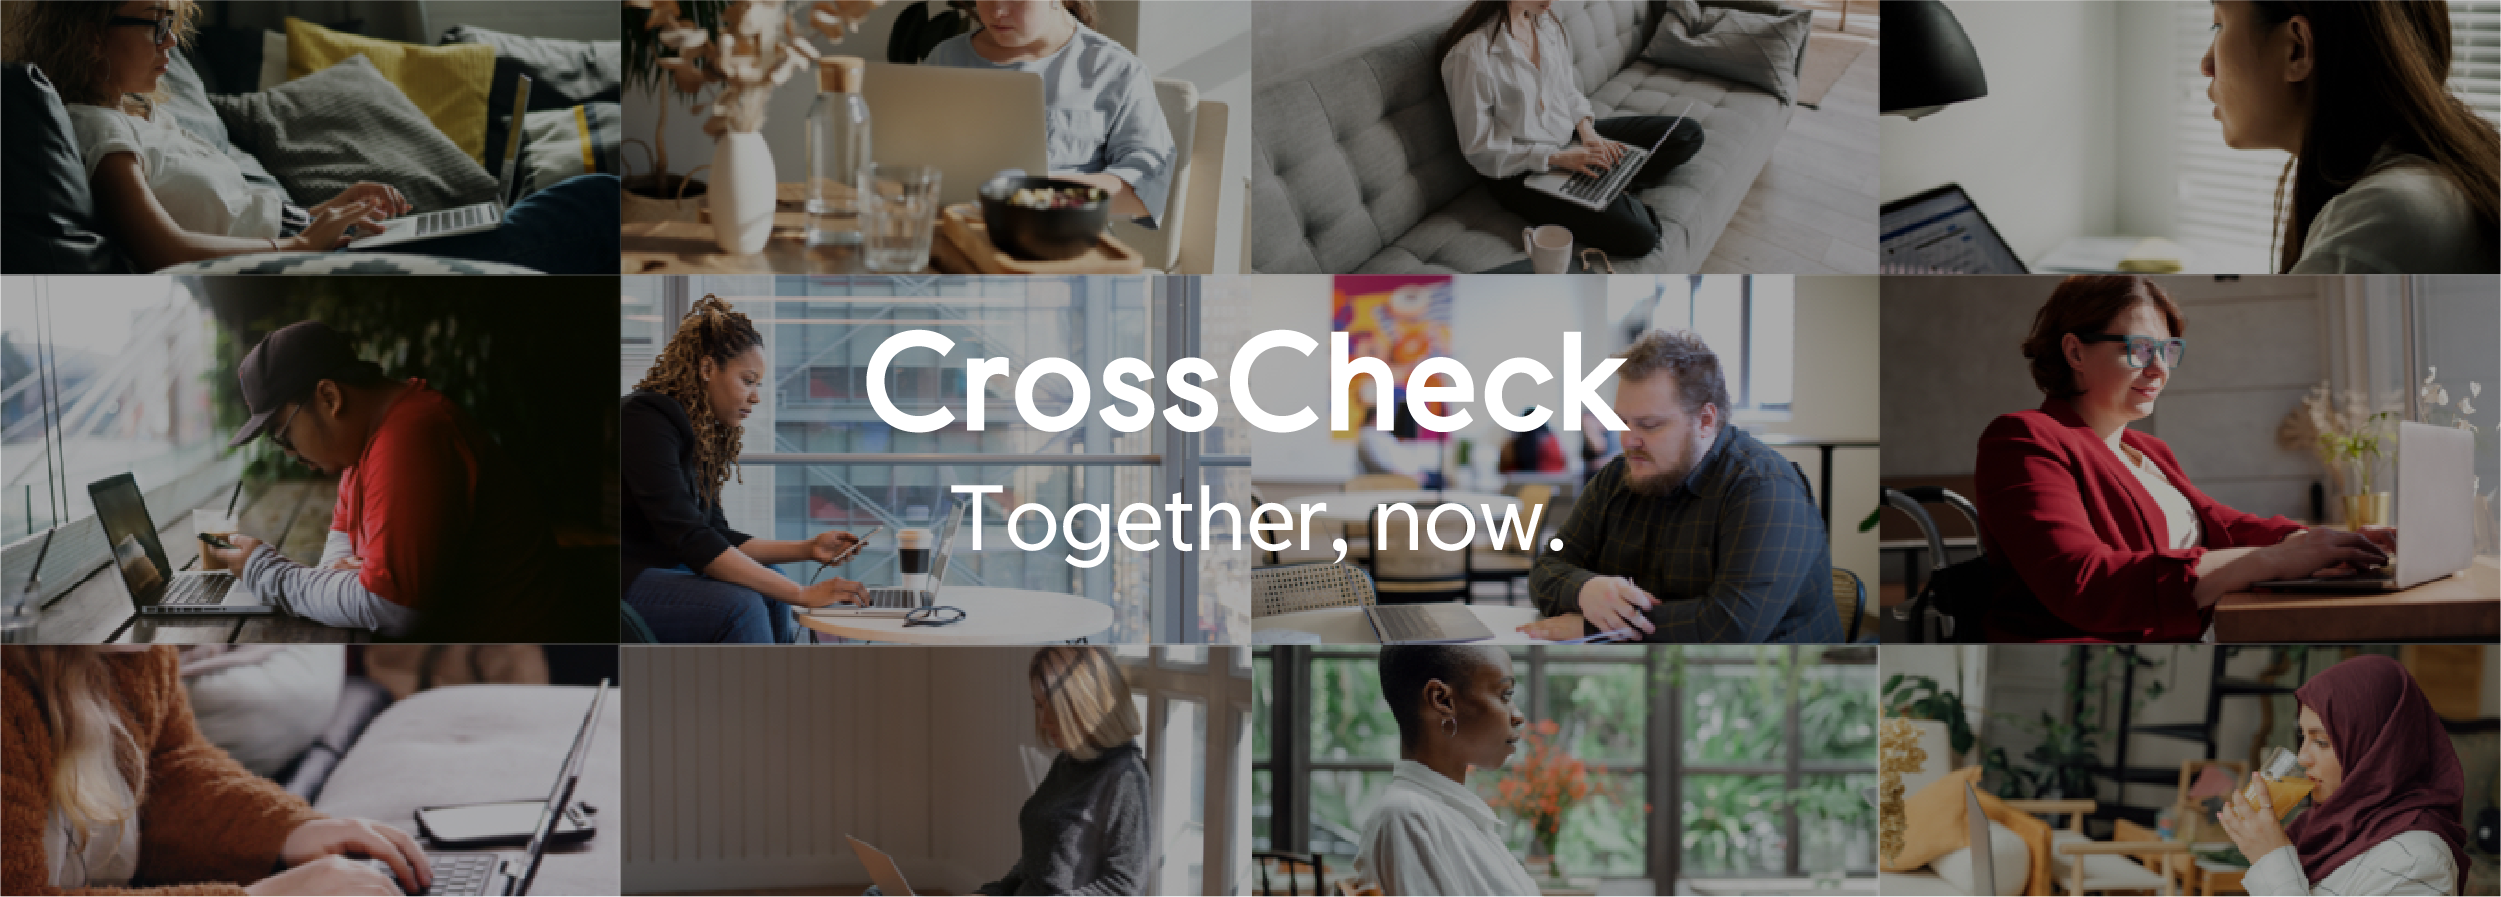 Accept Check Payment by CrossCheck